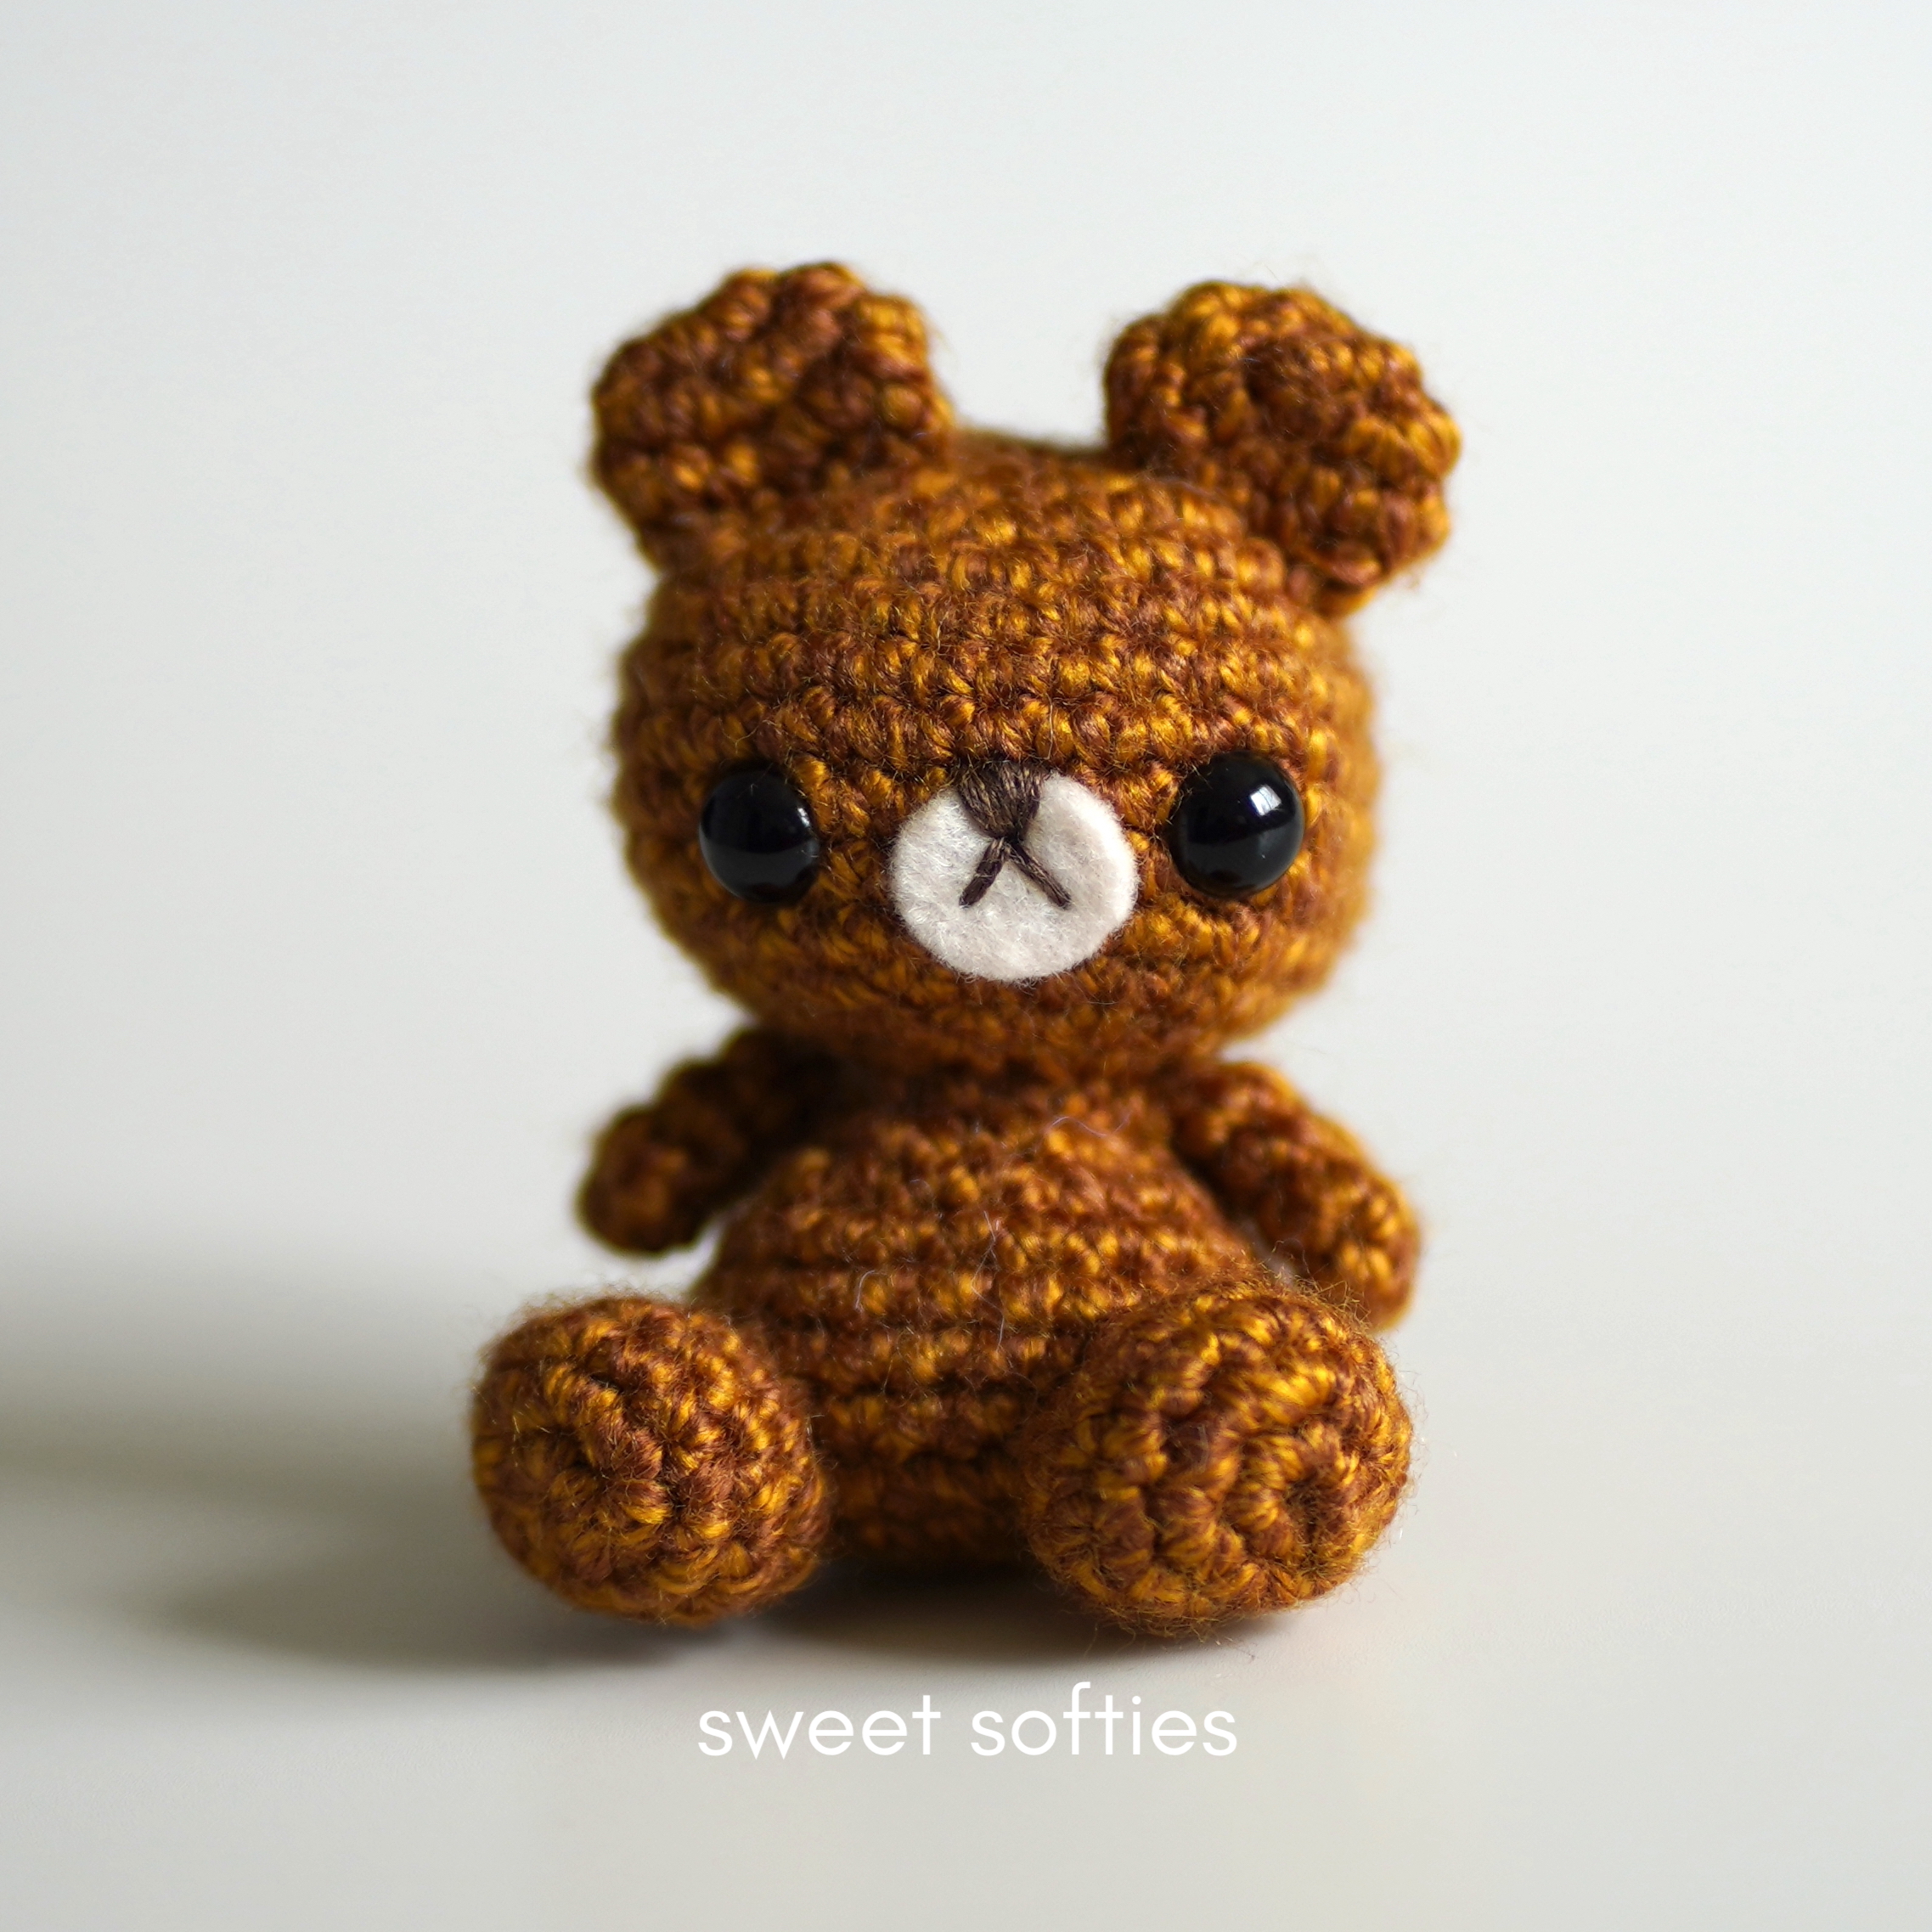 How to make a memory bear - 6 tips from an experienced maker